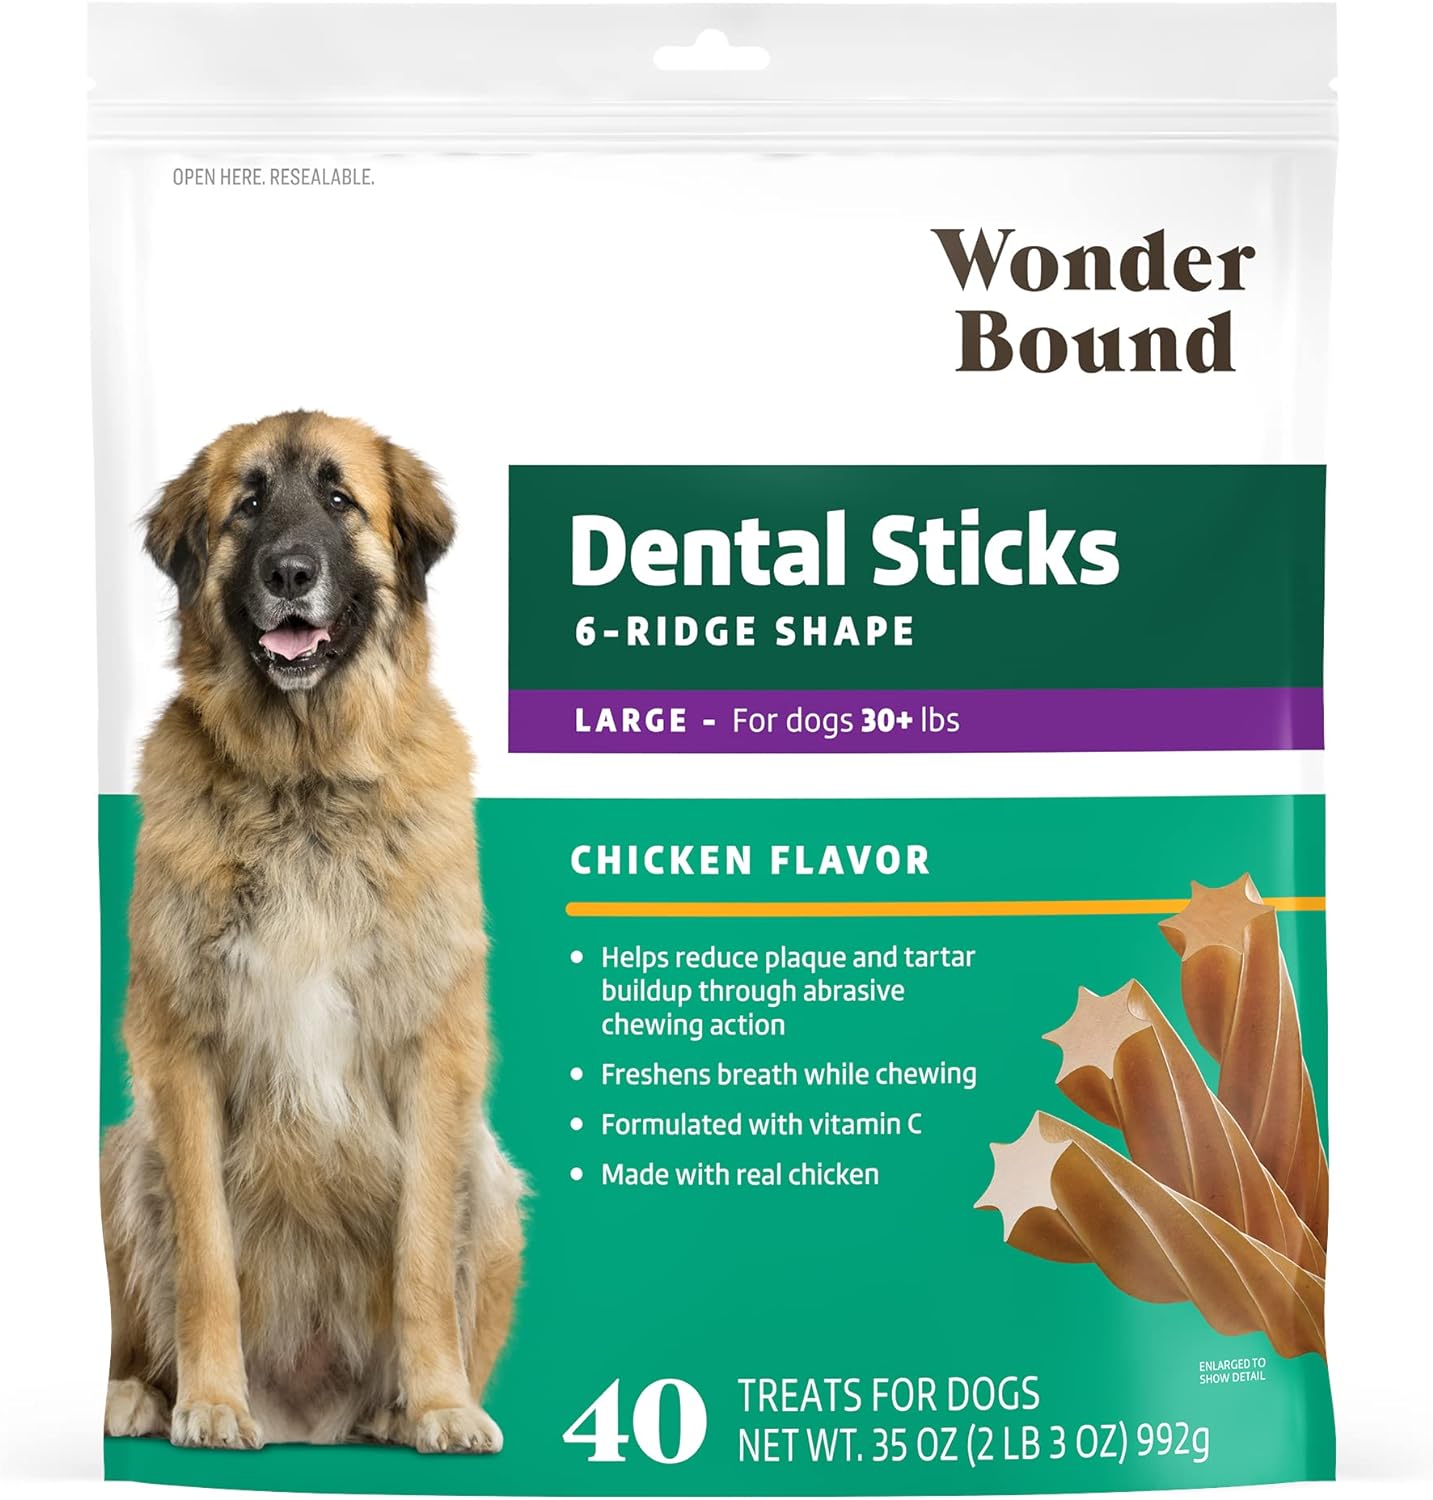 Amazon Brand - Wonder Bound Chicken Flavor Dental Sticks for Large Dogs (Over 30 lbs), 6-Ridge Shape for Plaque & Tartar Control, Freshens Breath, Made With Real Chicken, 40 Count (Pack of 1)